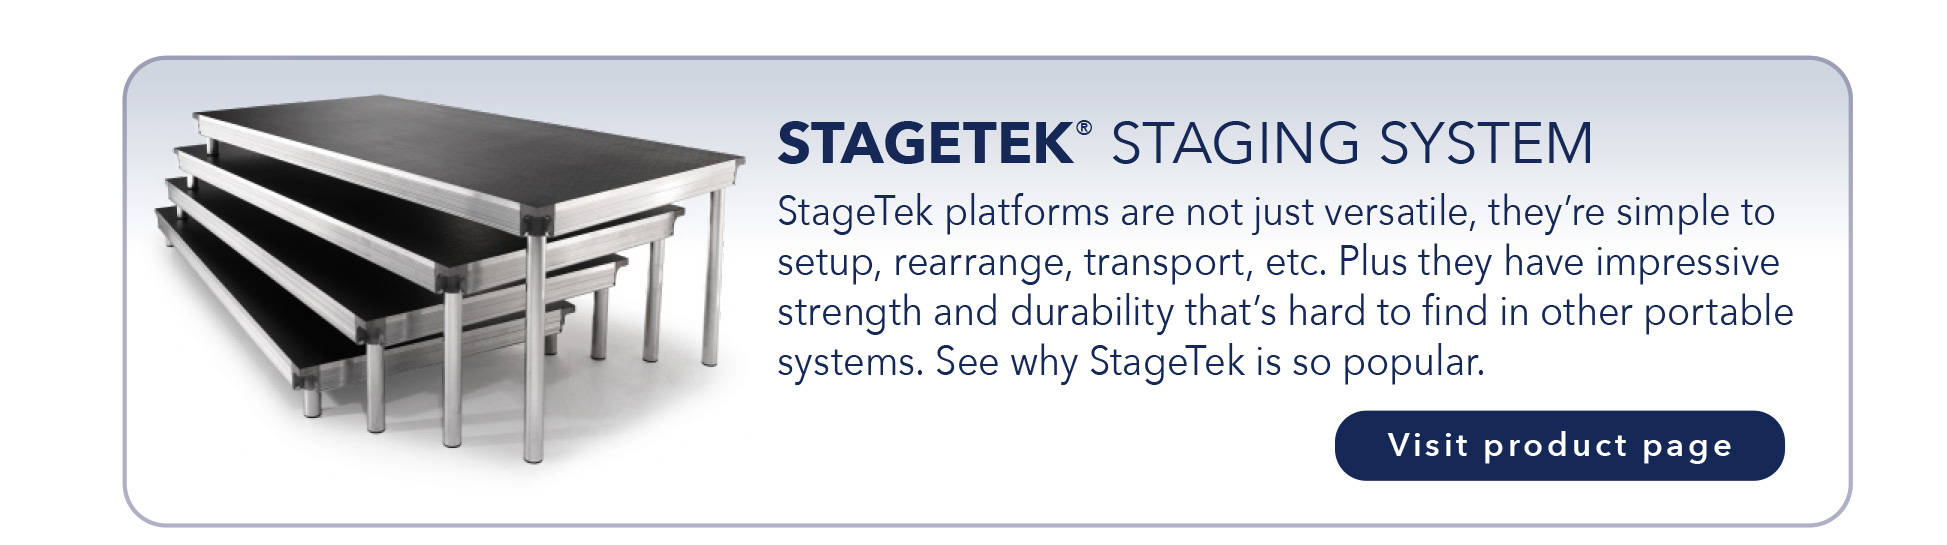 STAGETEK® STAGING SYSTEM
StageTek platforms are not just versatile, they’re simple to
setup, rearrange, transport, etc. Plus they have impressive
strength and durability that’s hard to find in other portable
systems. See why StageTek is so popular.